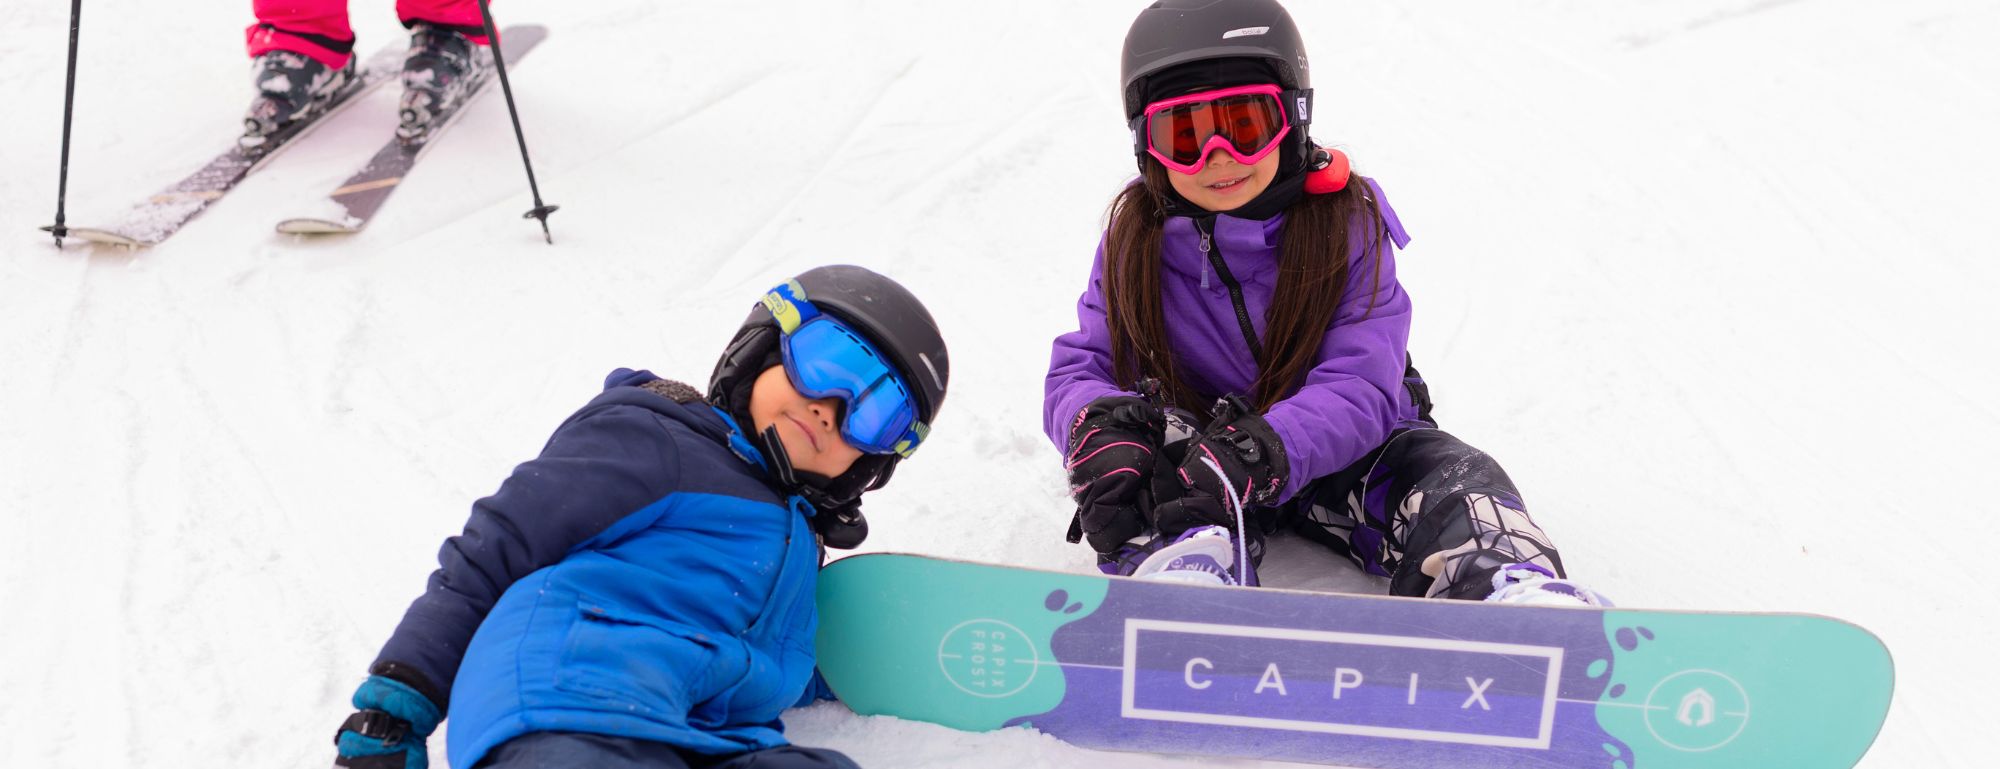 Top tips for planning a ski trip for your school pupils